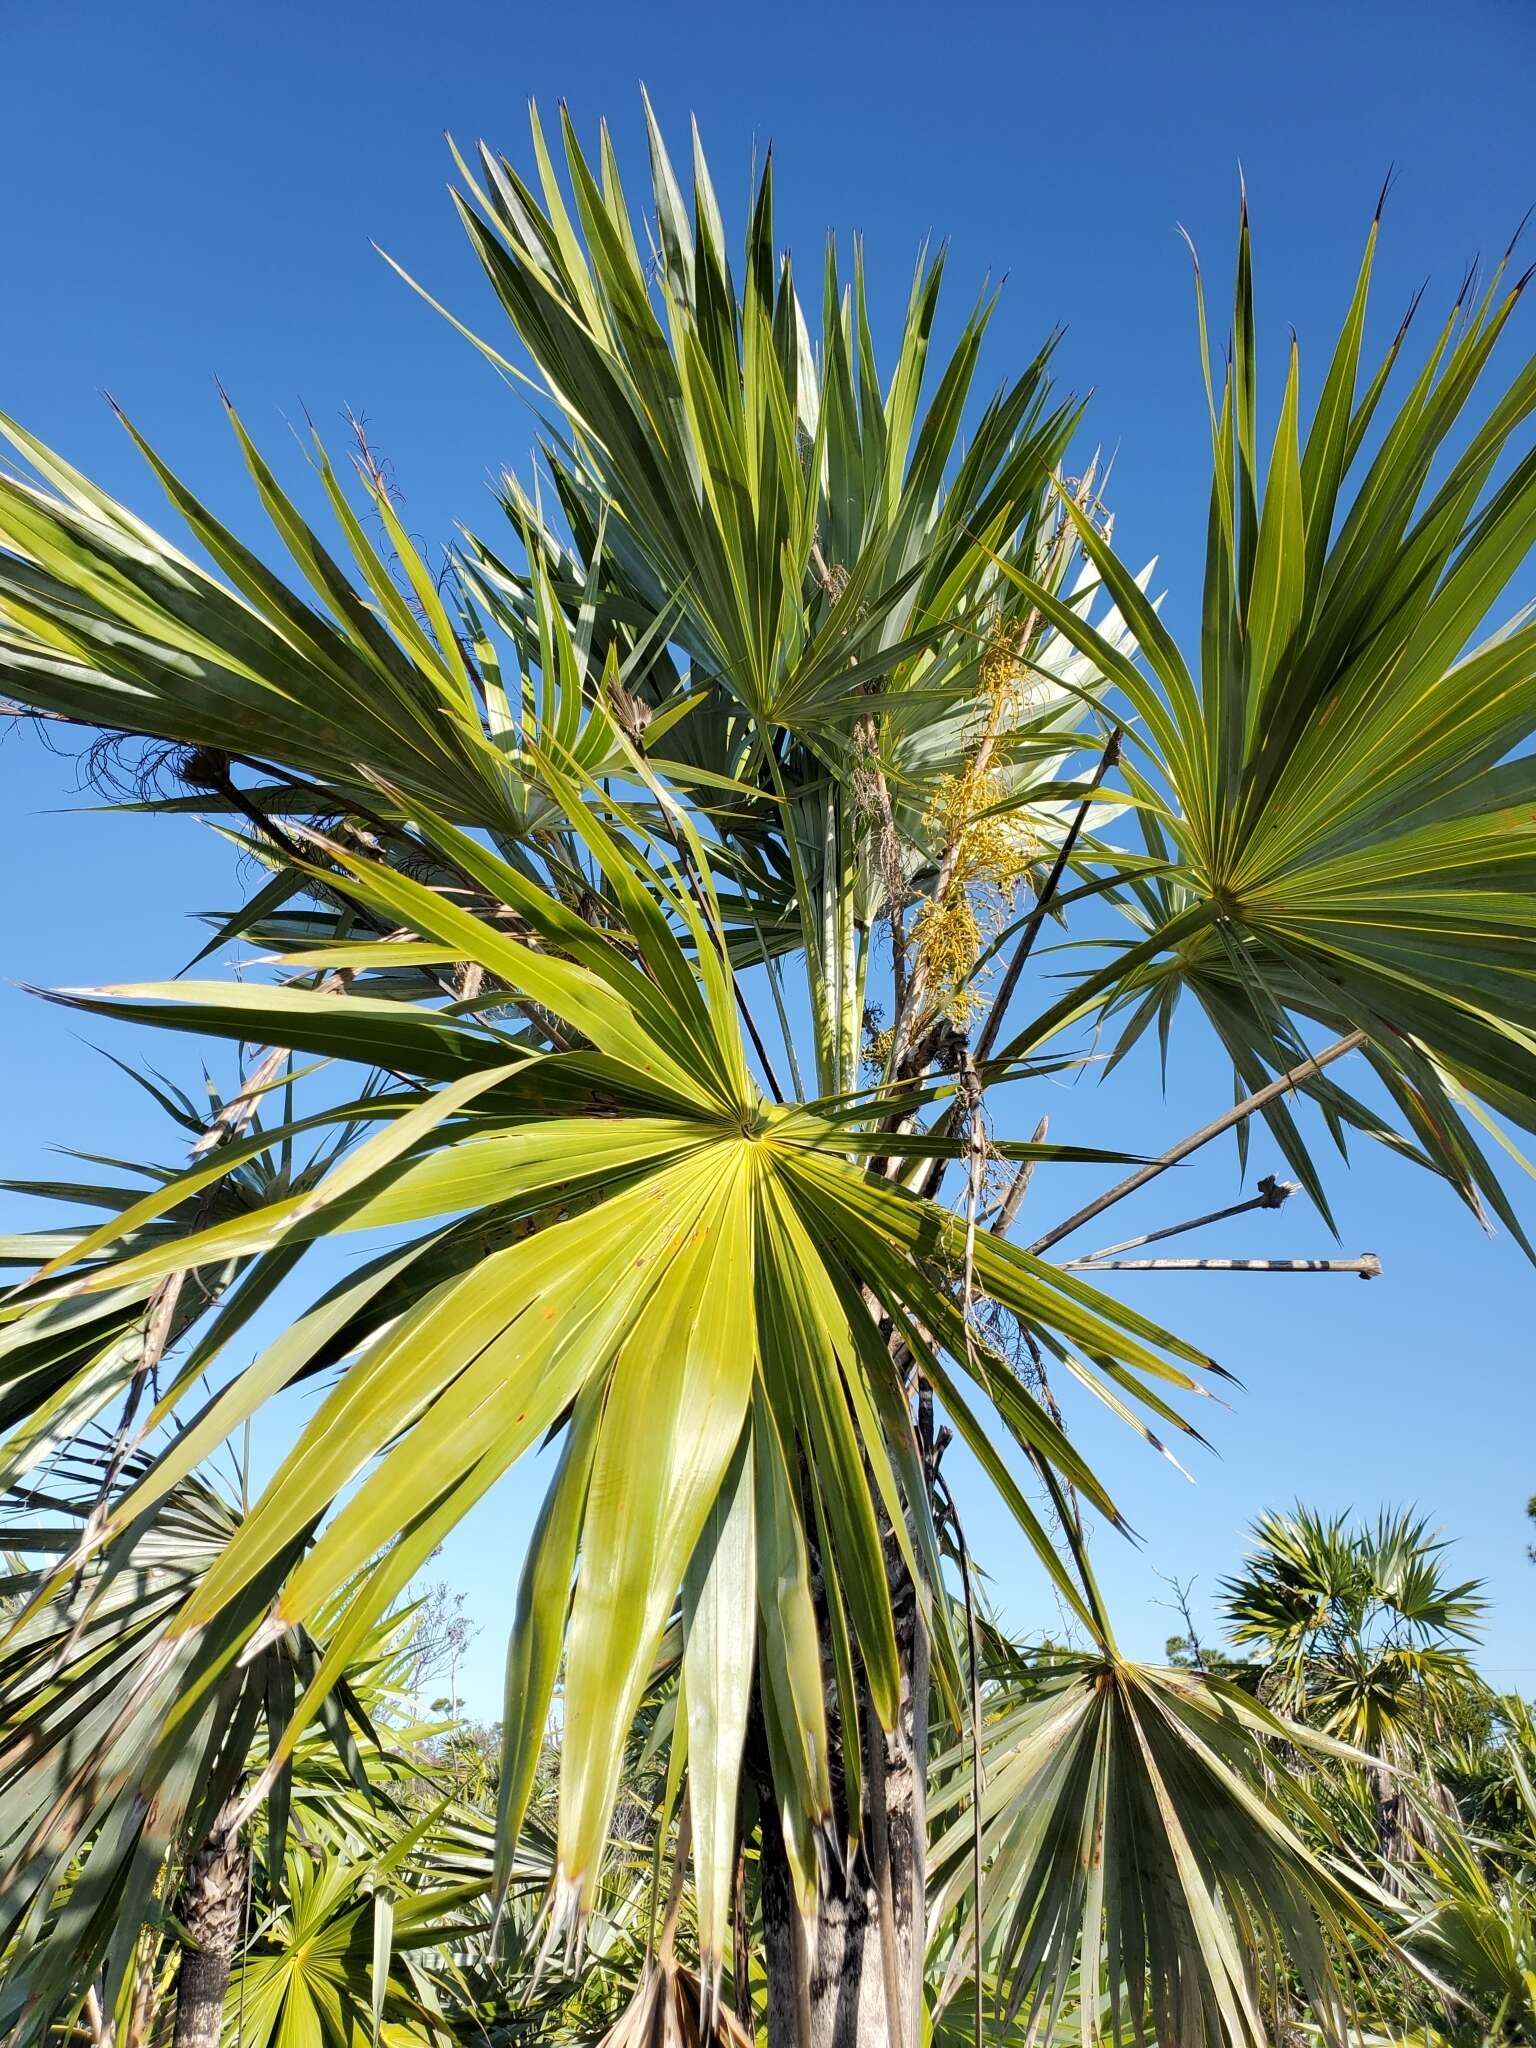 Image of white thatch palm